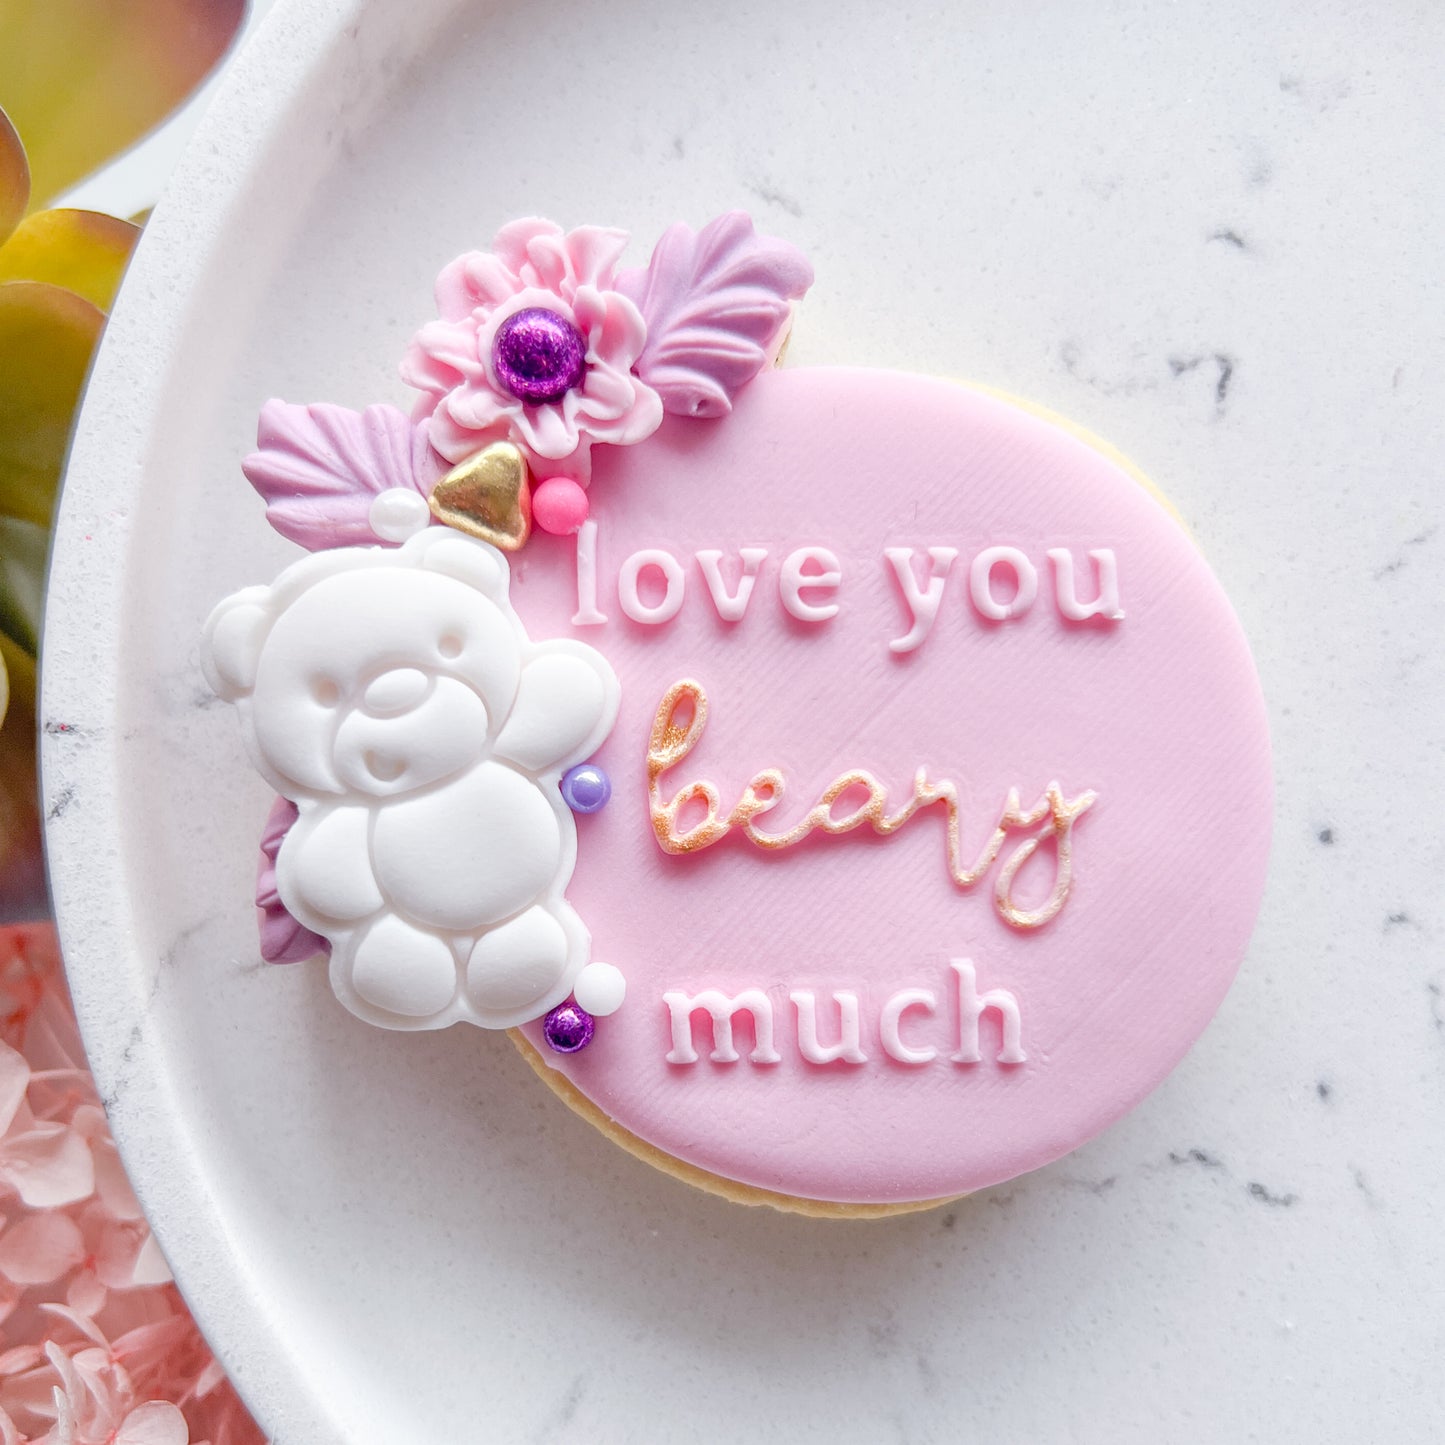 "Love you beary much" - Embossing Stamp